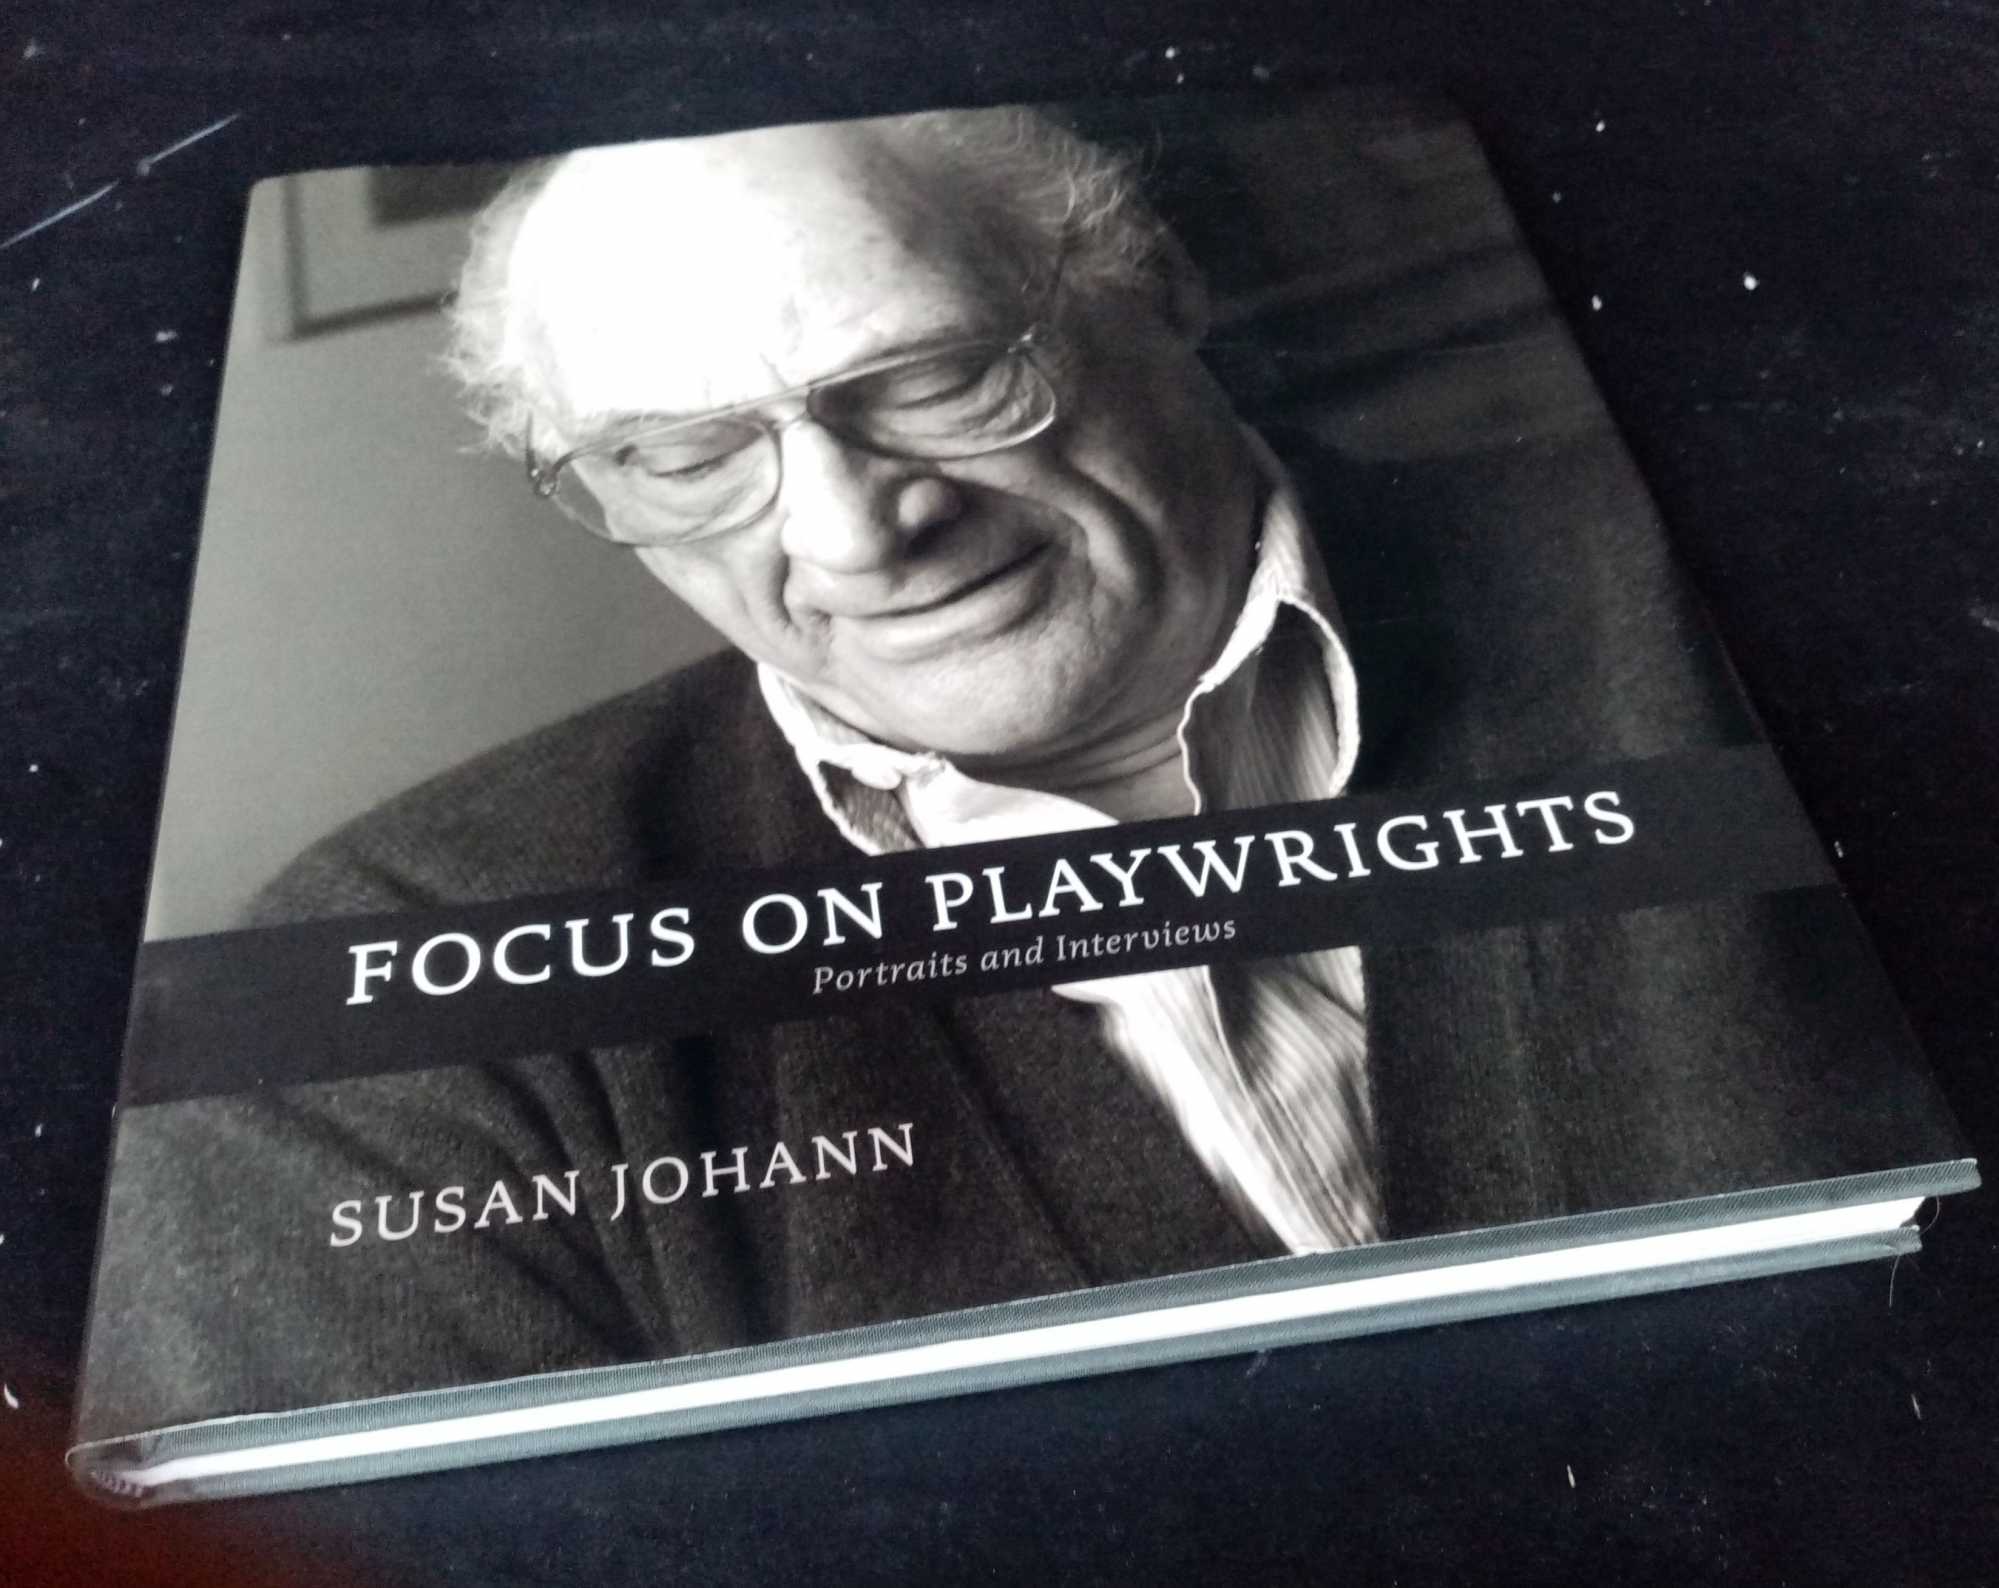 Susan Johann - Focus on Playwrights: Portraits and Interviews